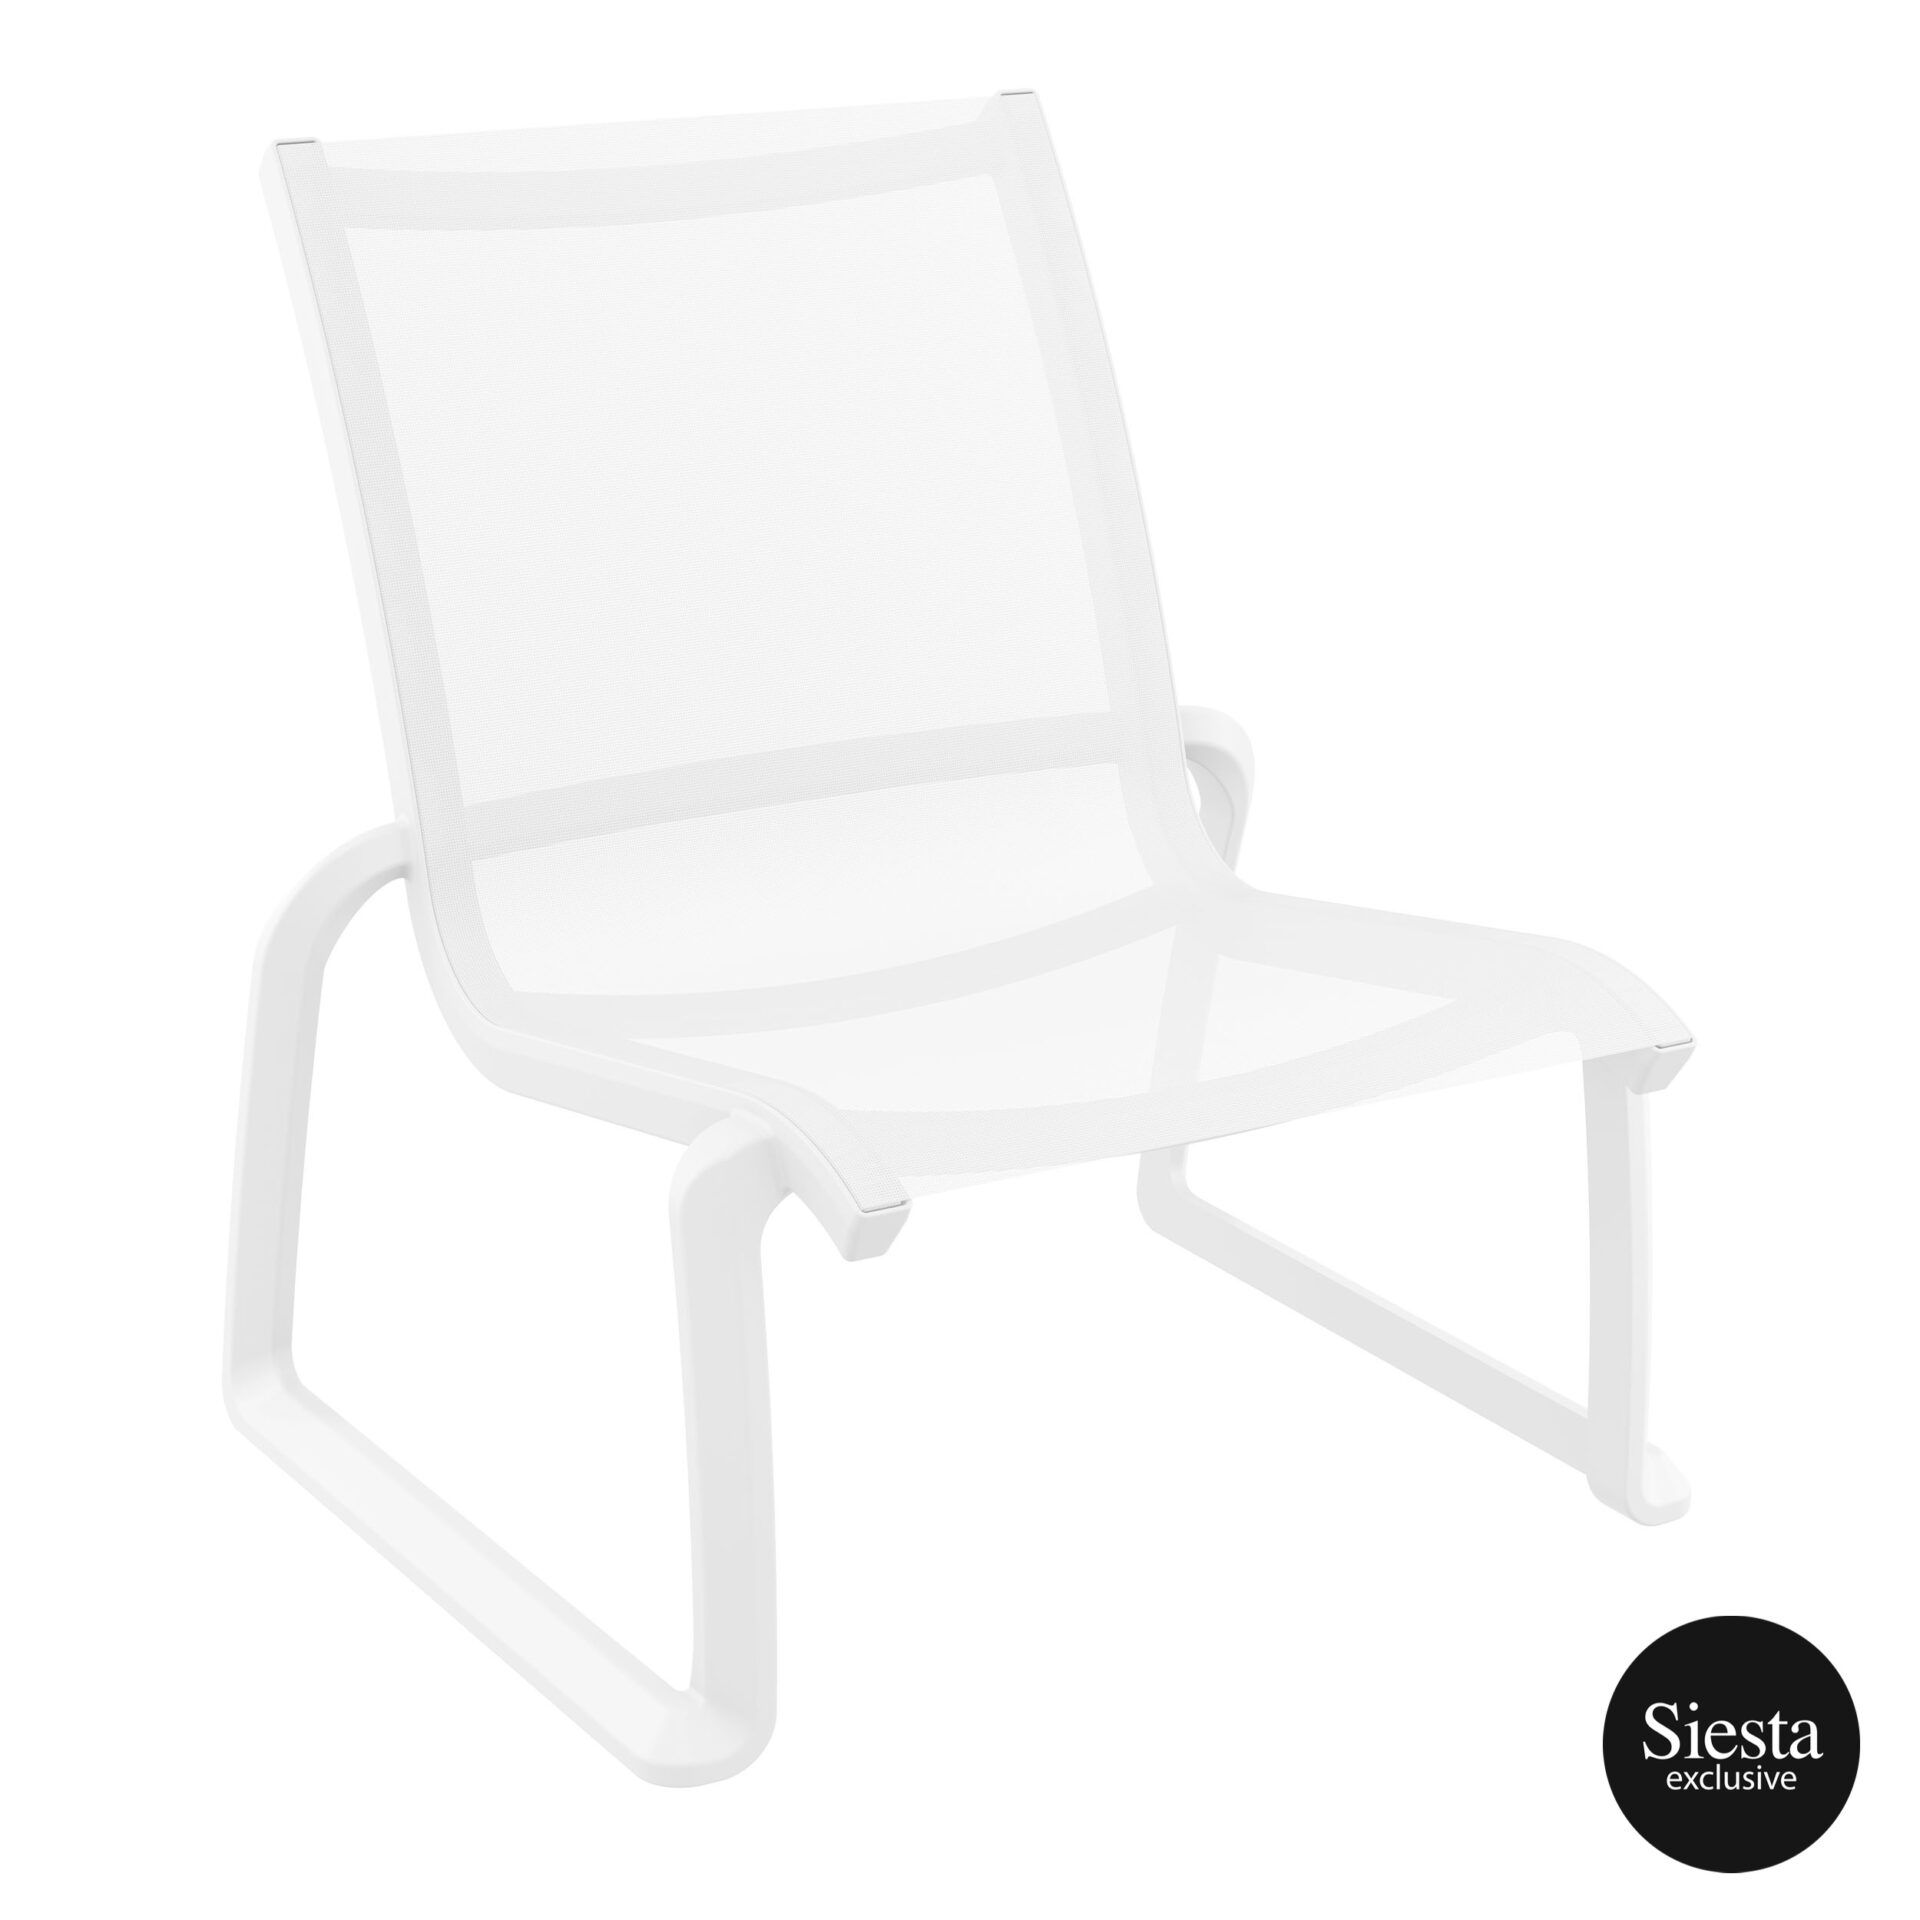 019 pacific lounge chair white white front side 1